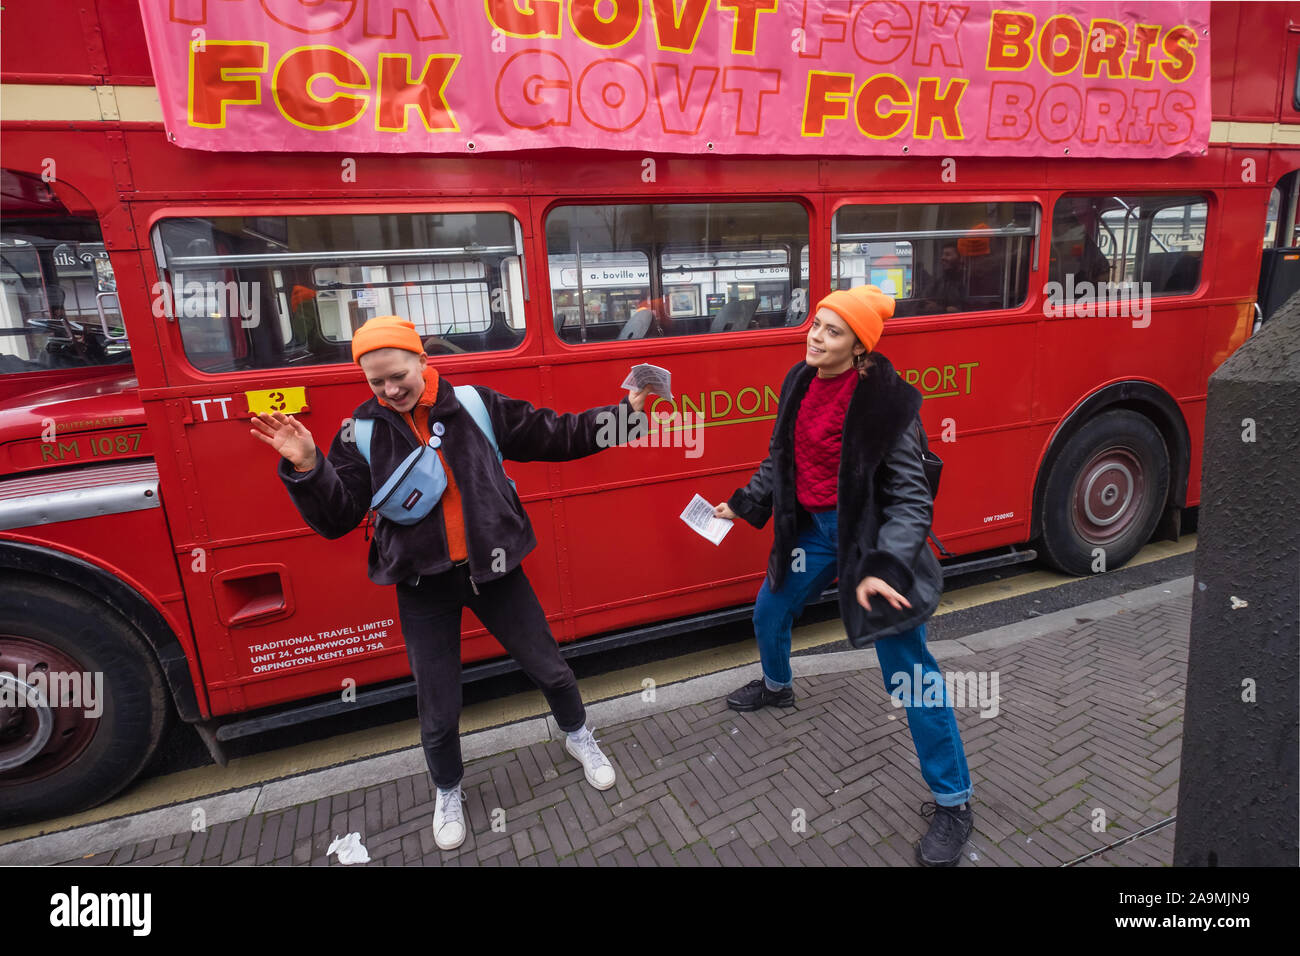 London, UK. 16th November 2019. People dance to music from the bus. Protesters from FCKBoris in orange knitted hats walk through Uxbridge shopping centre handing out fliers urging everyone to register and vote against Boris Johnson and kick him out for his racist, elitist politics. They marched with a sound system on a bus to Brunel University to persuade students. Johnson had a majority of just over 5 thousand in 2017 and Labour candidate Ali Milani has strong hopes of beating him and the other 10 candidates. Peter Marshall/Alamy Live News Stock Photo